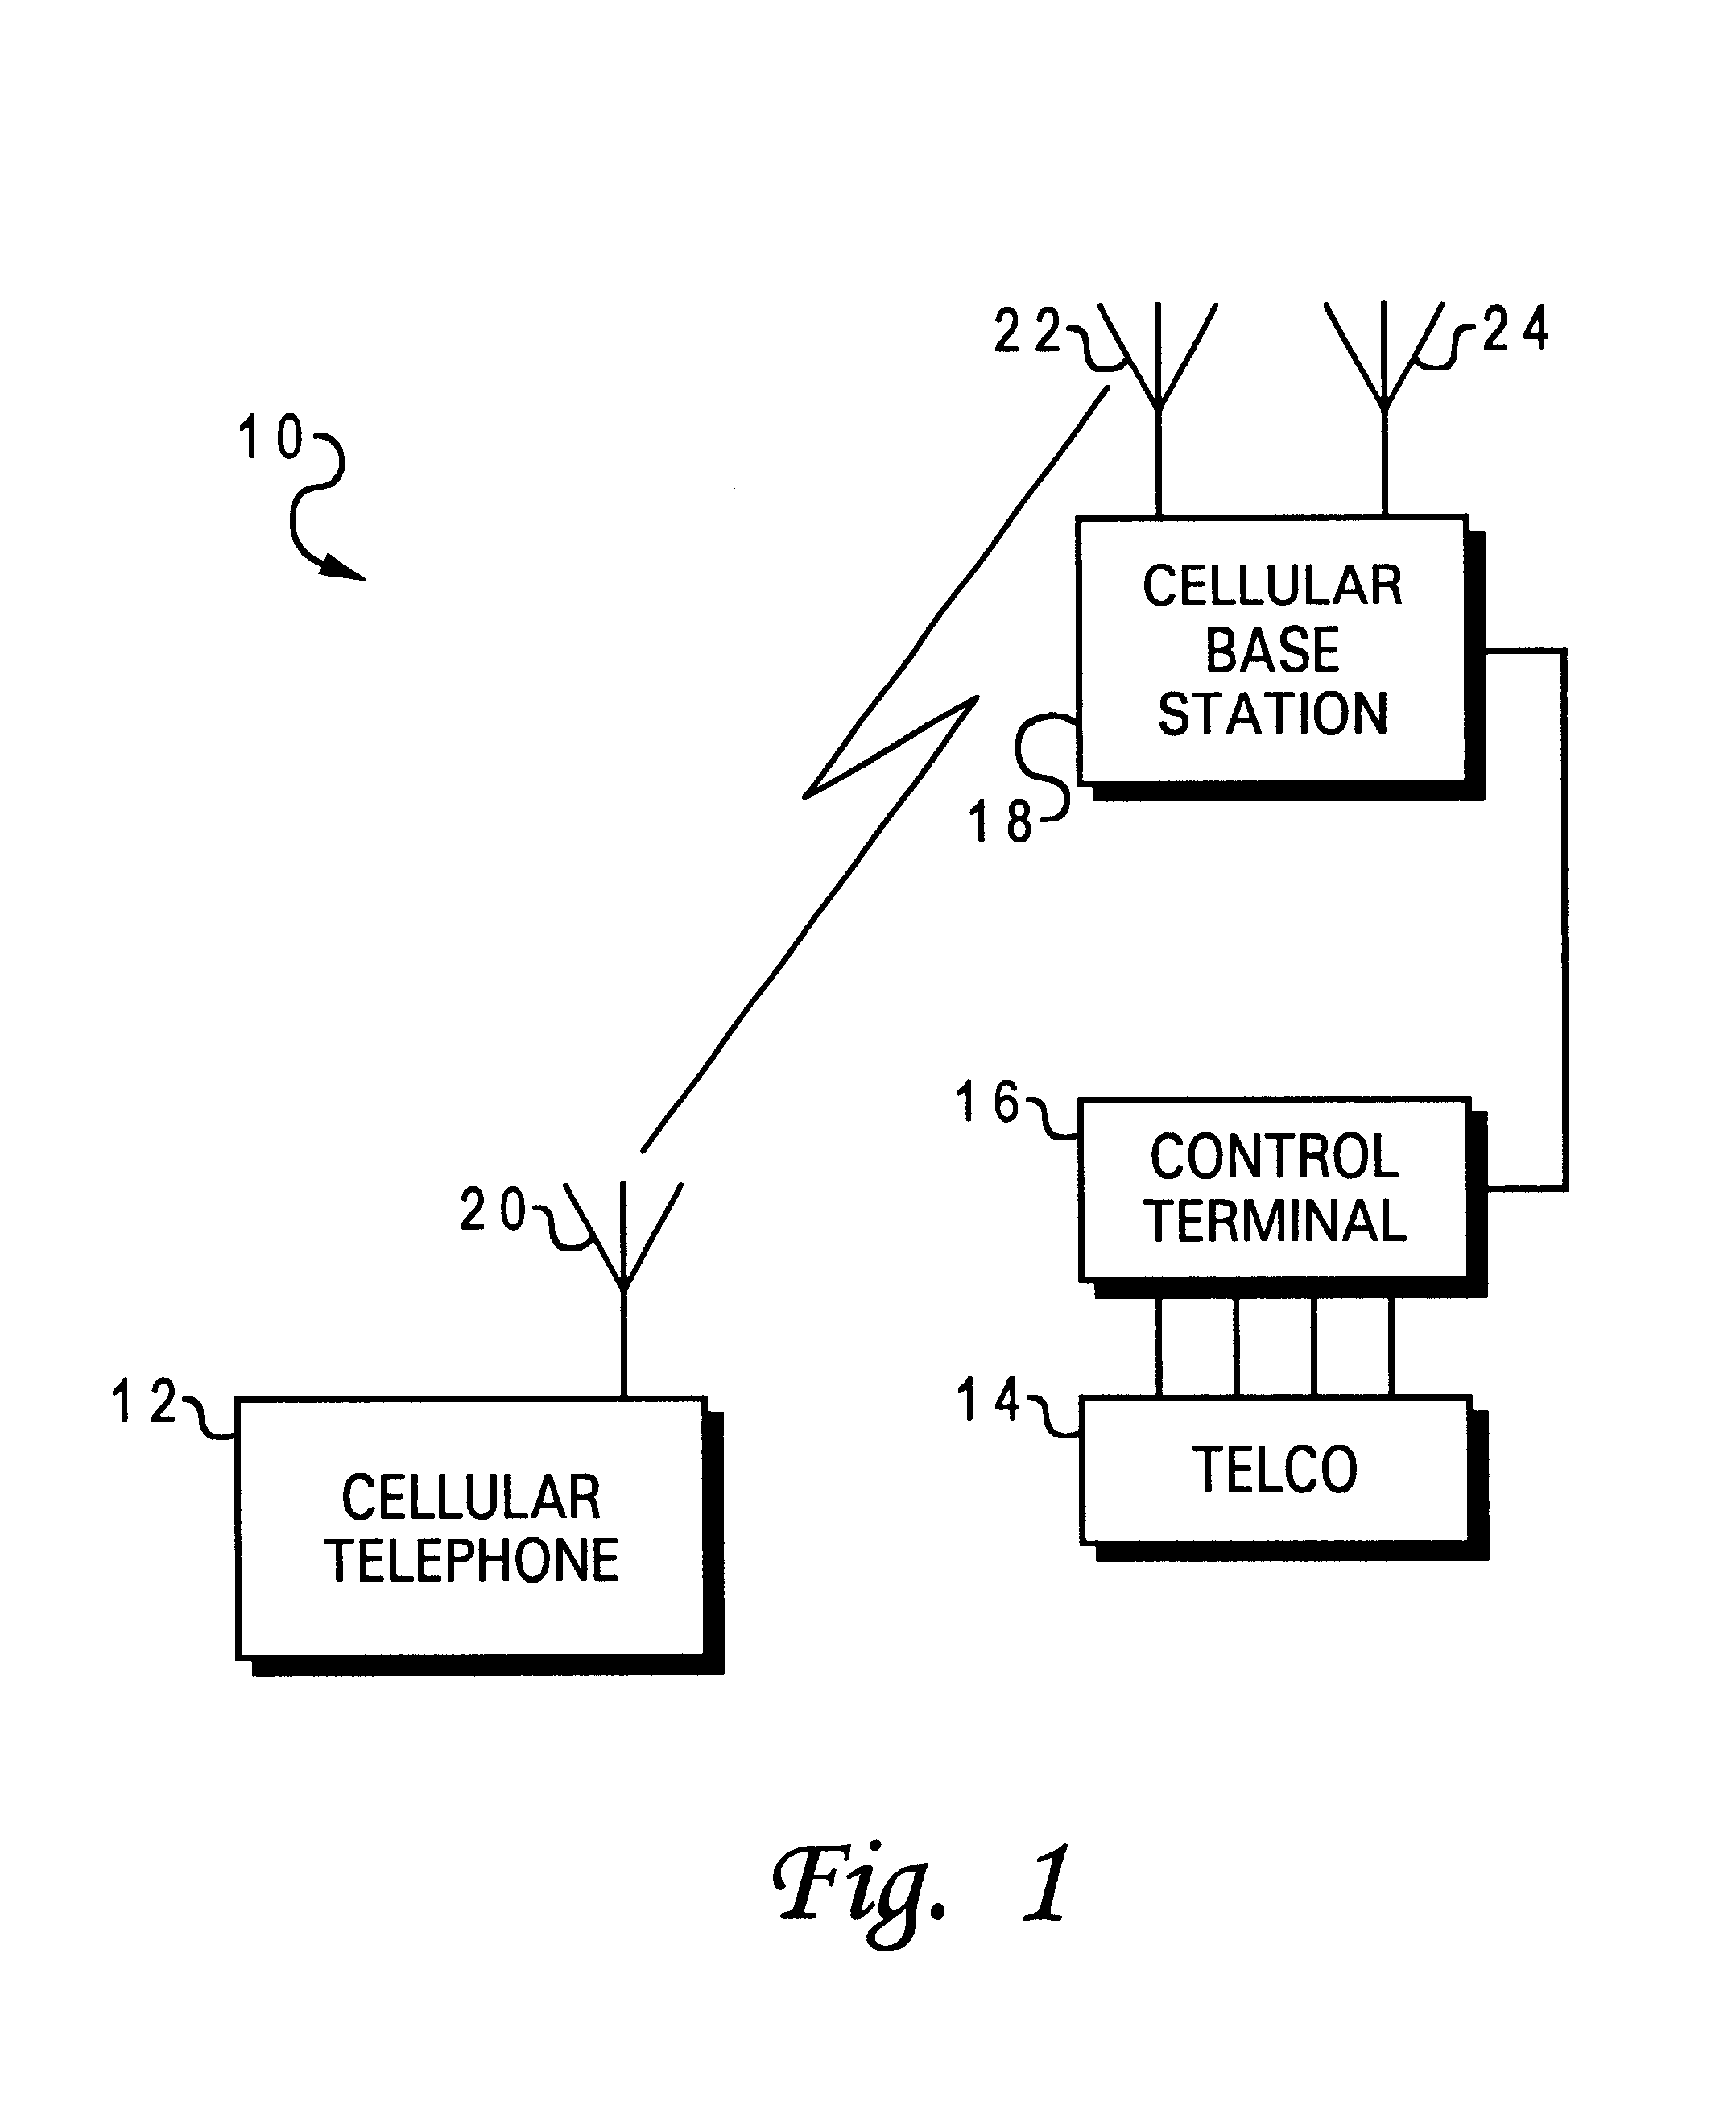 Method and system in a wireless communications network for the simultaneous transmission of both voice and non-voice data over a single radio frequency channel